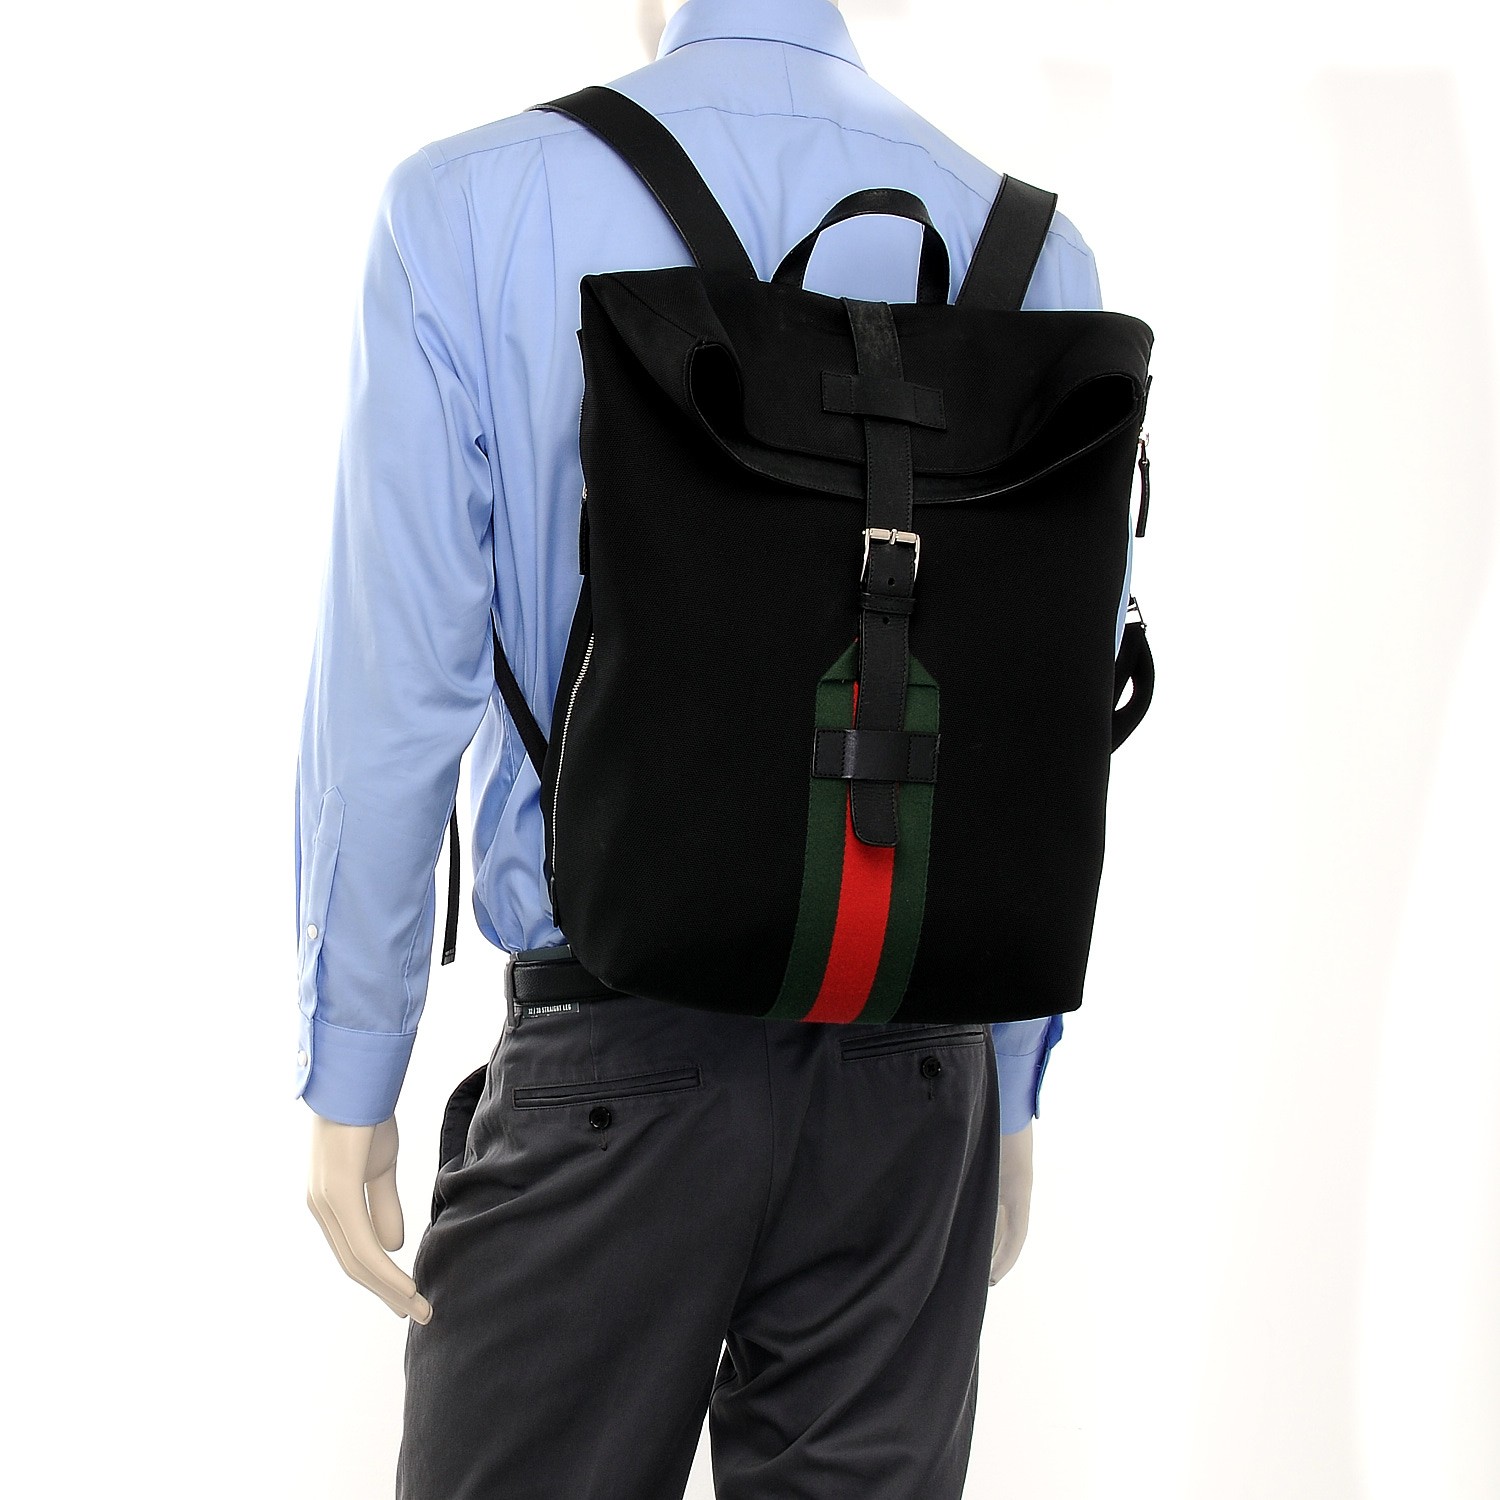 techno canvas backpack gucci